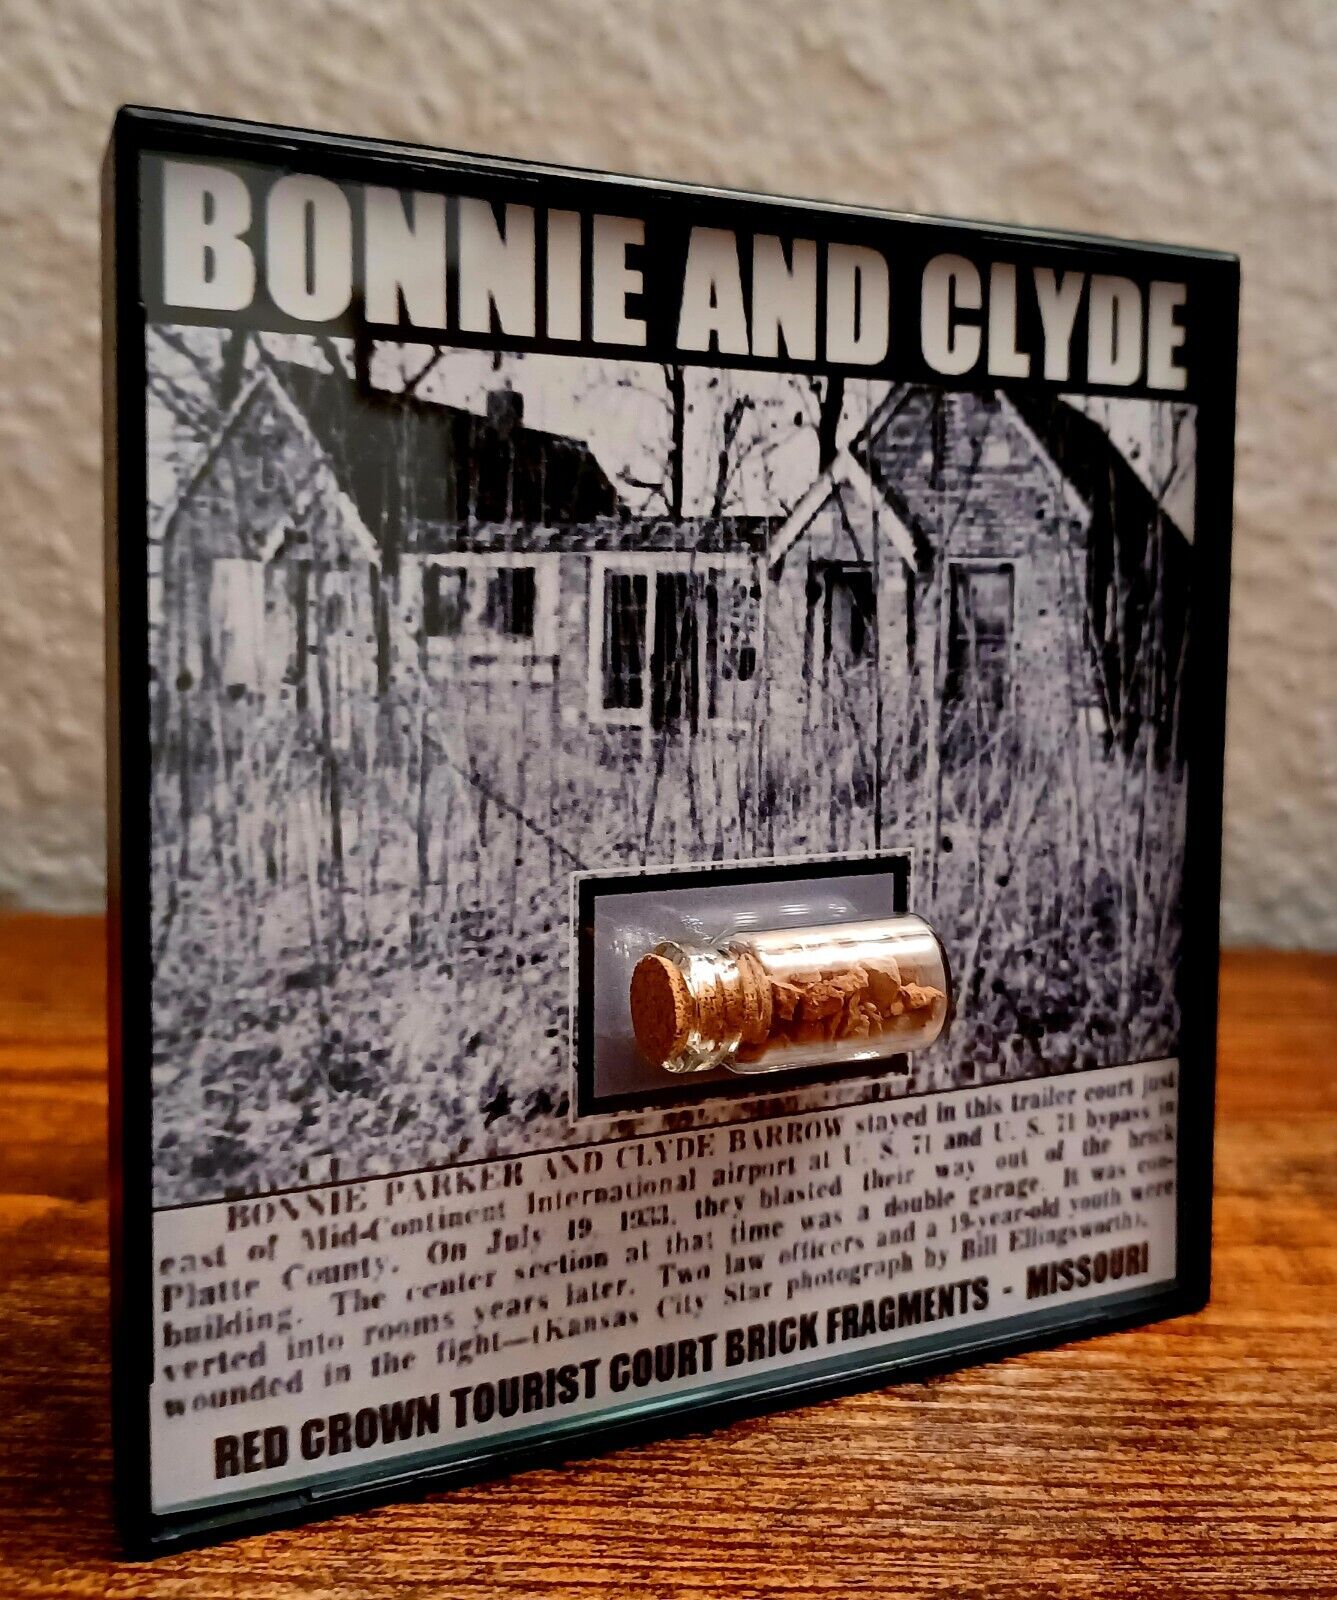 Bonnie And Clyde Red Crown Tourist Court Brick Fragments Framed Relic Display